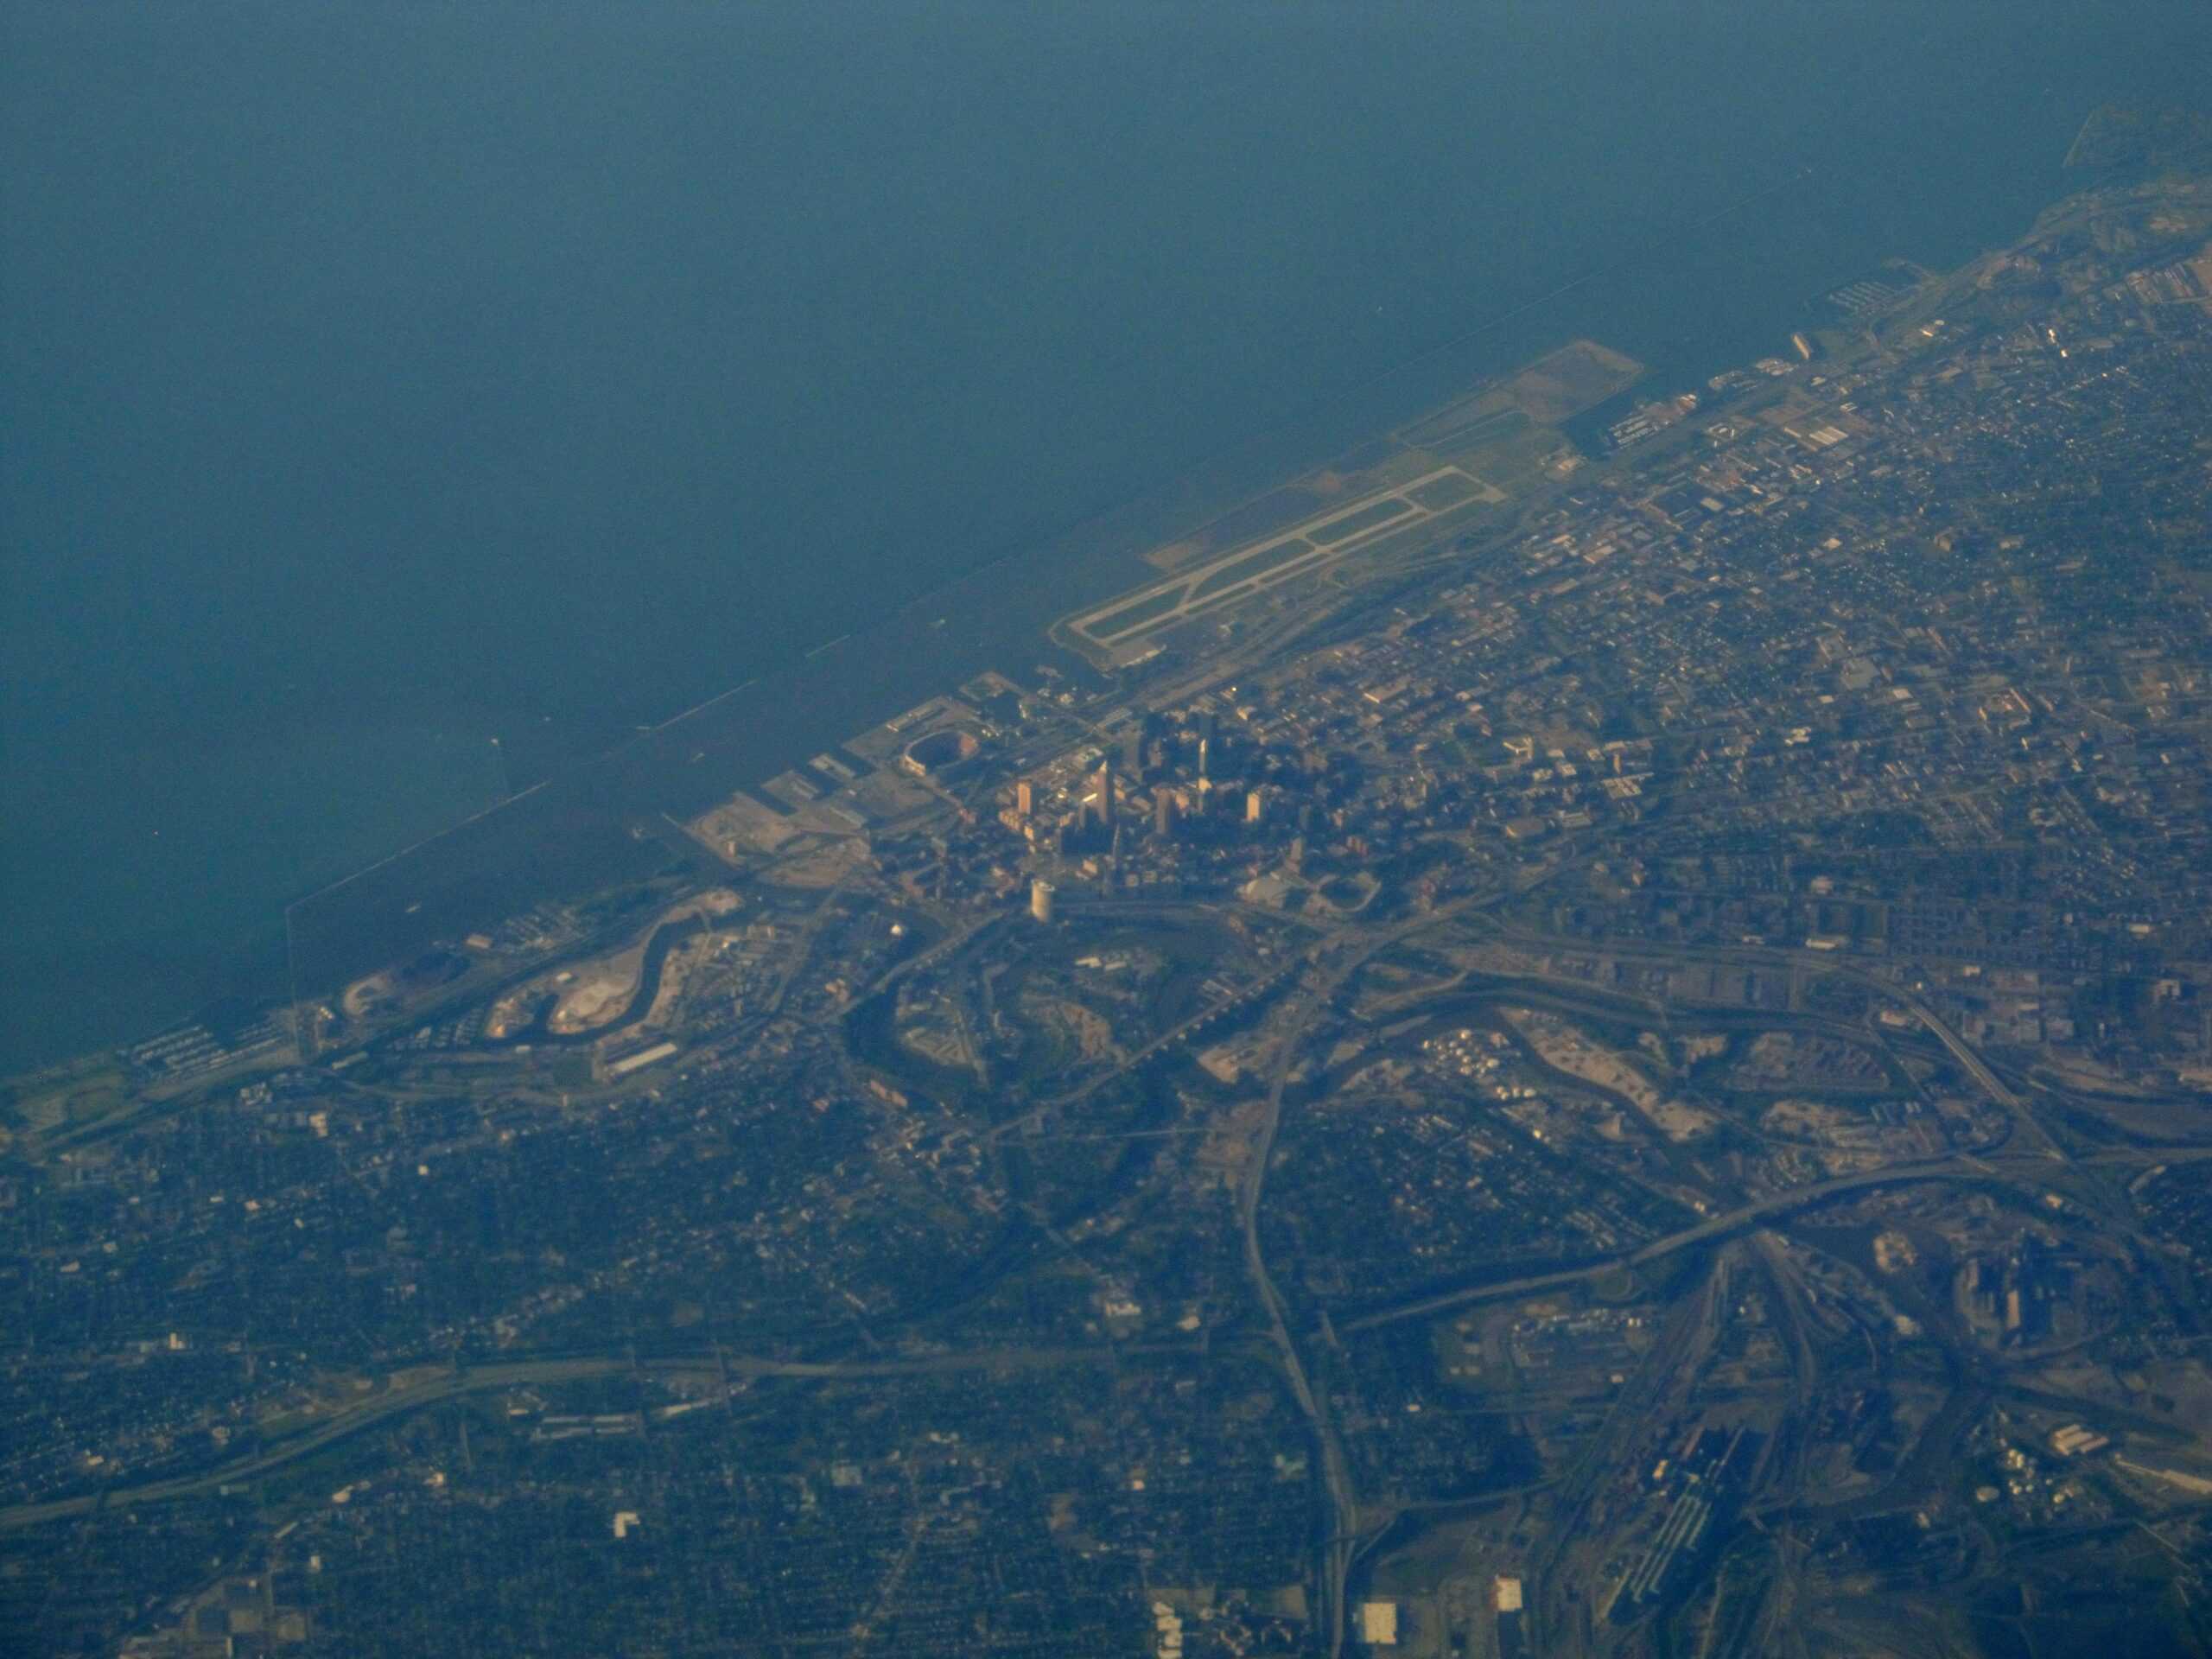 Cleveland-Elyria+Ohio+people | Cleveland, Ohio from Flight Between Newark and Chicago